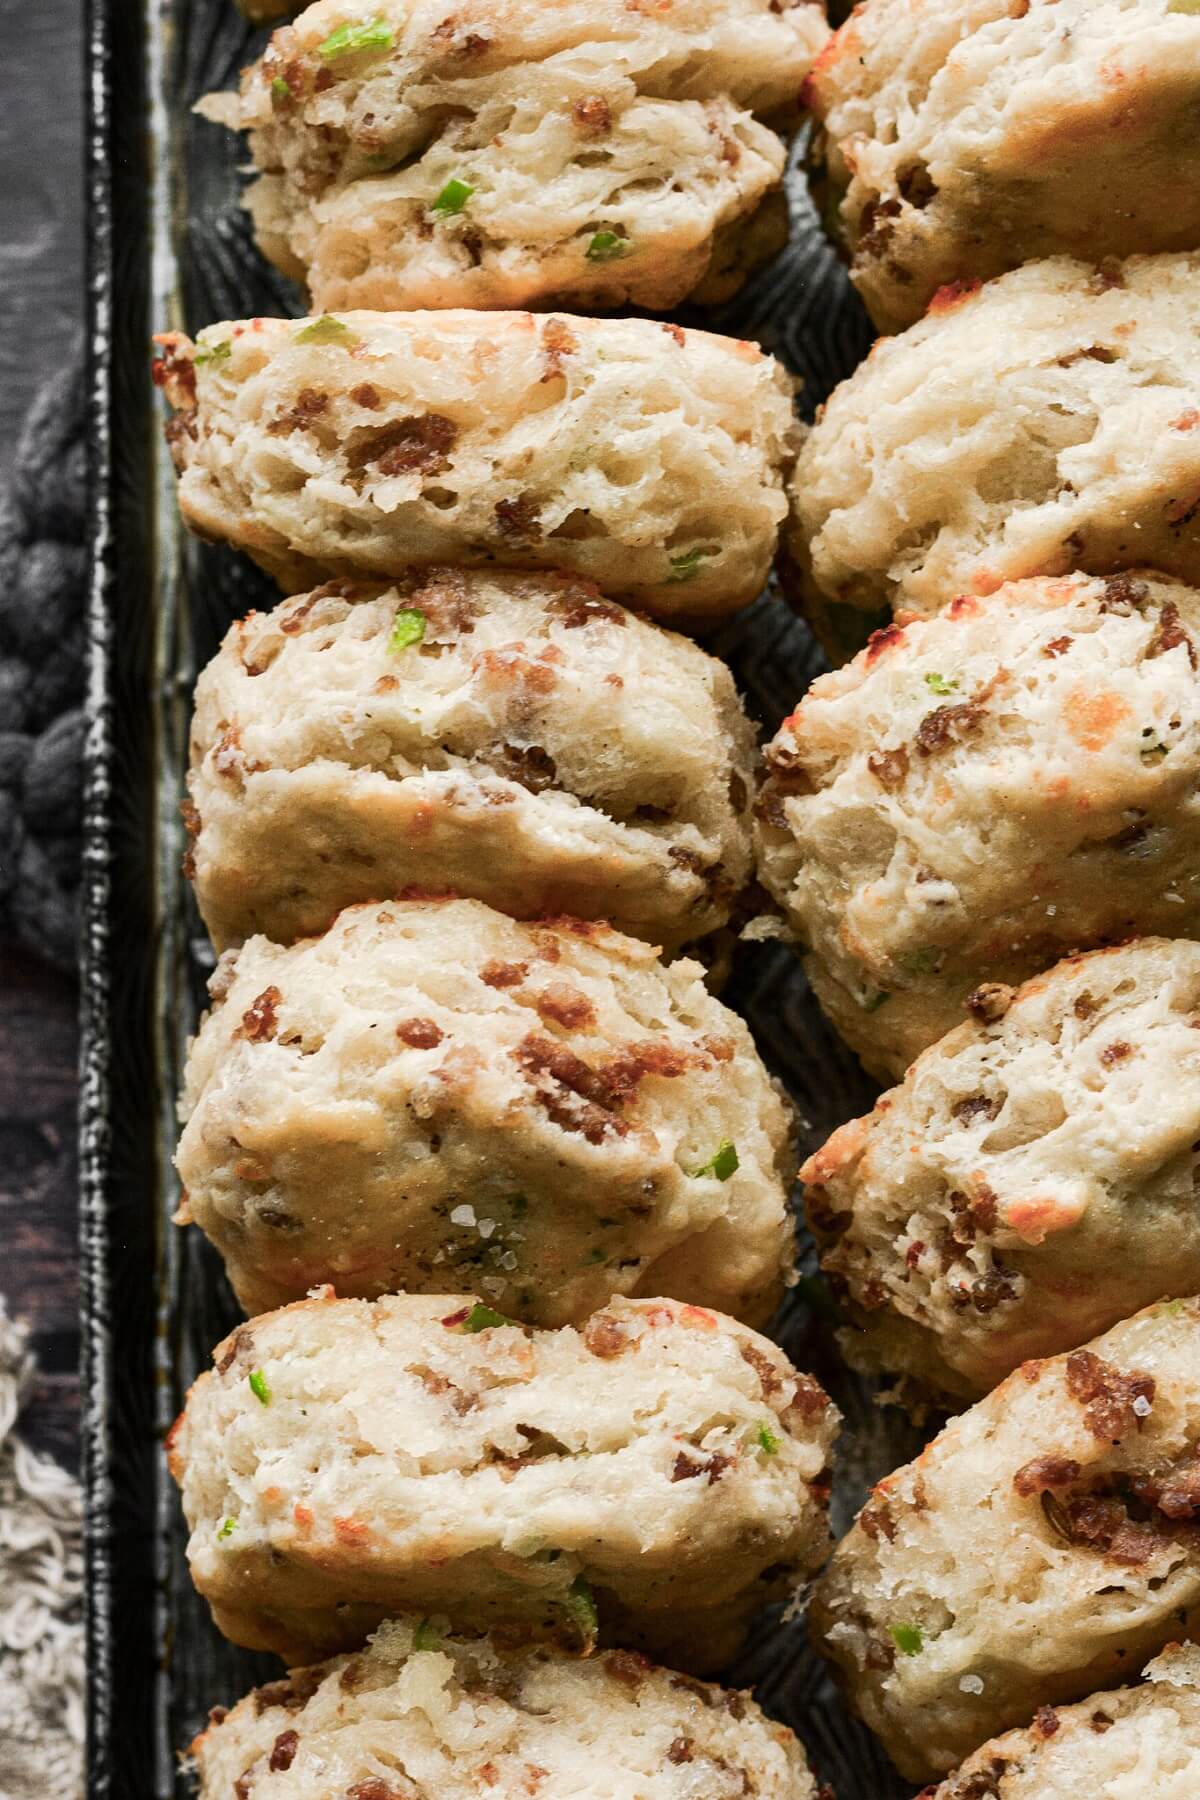 Sausage cheese biscuits.